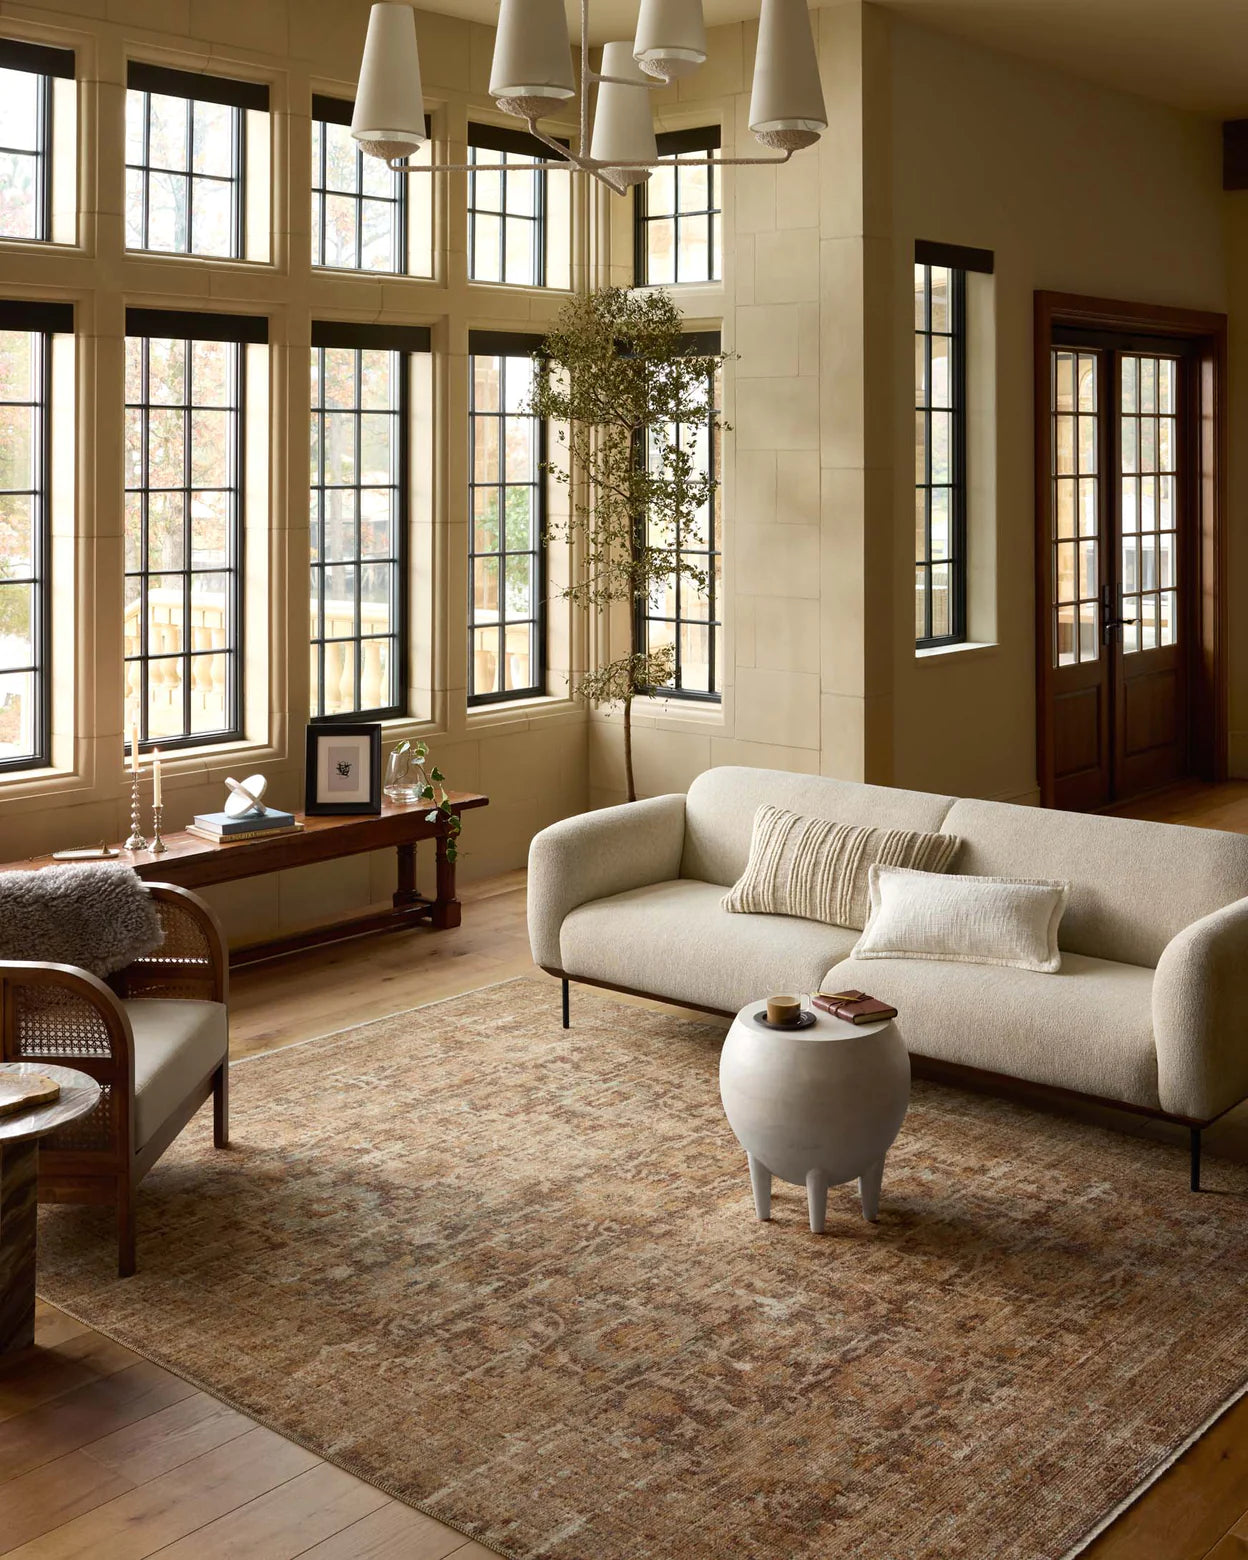 An elegant living room with large windows, beige walls, and a classic cream sofa. A small, rounded table and a wicker chair add to the cozy, well-lit space in Arizona style with a Bark / Multi Rug by Loloi Rugs.